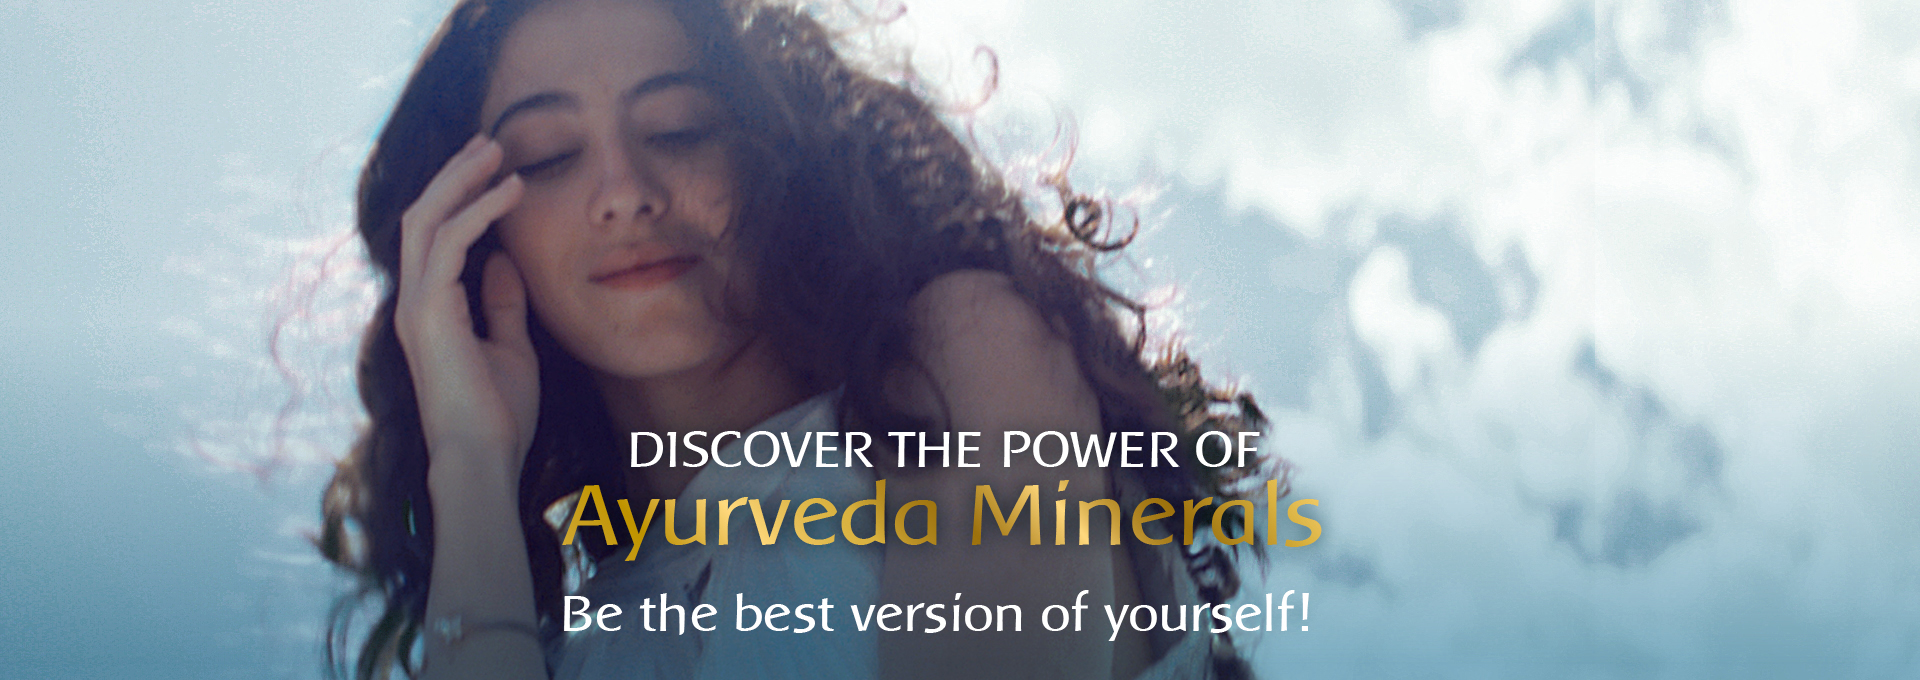 Discover the Power of Ayurveda Minerals - Be the best version of yourself!